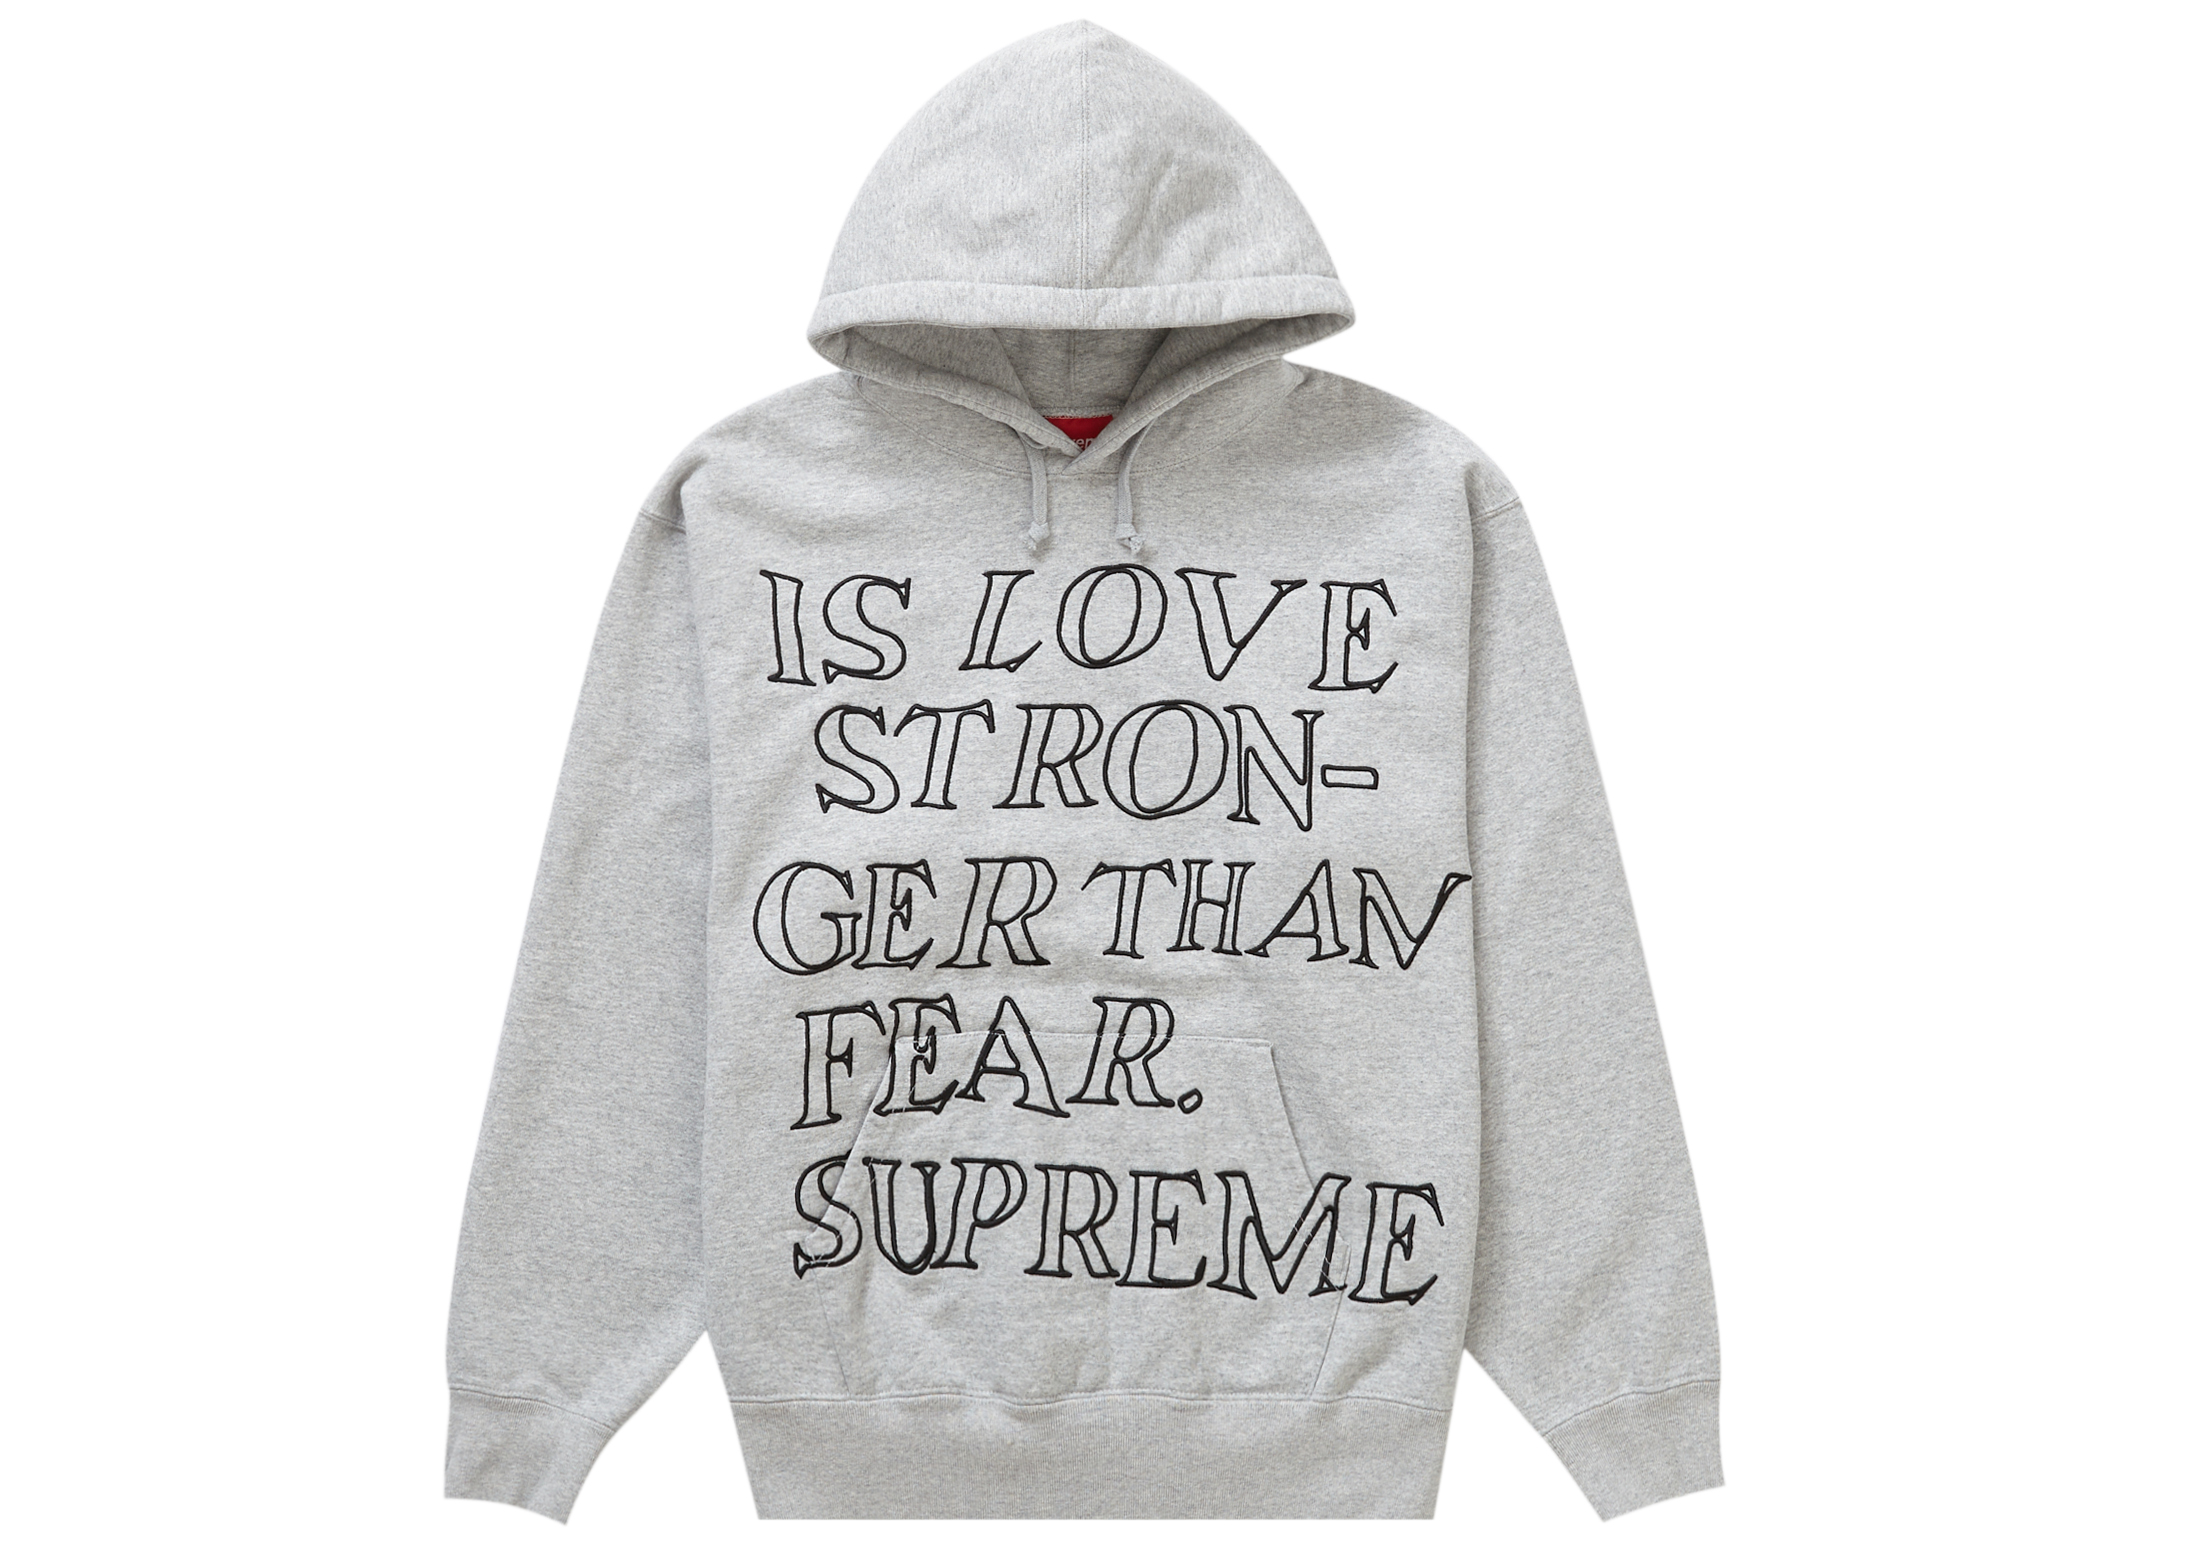 Supreme Stronger Than Fear Hooded XL新品未使用